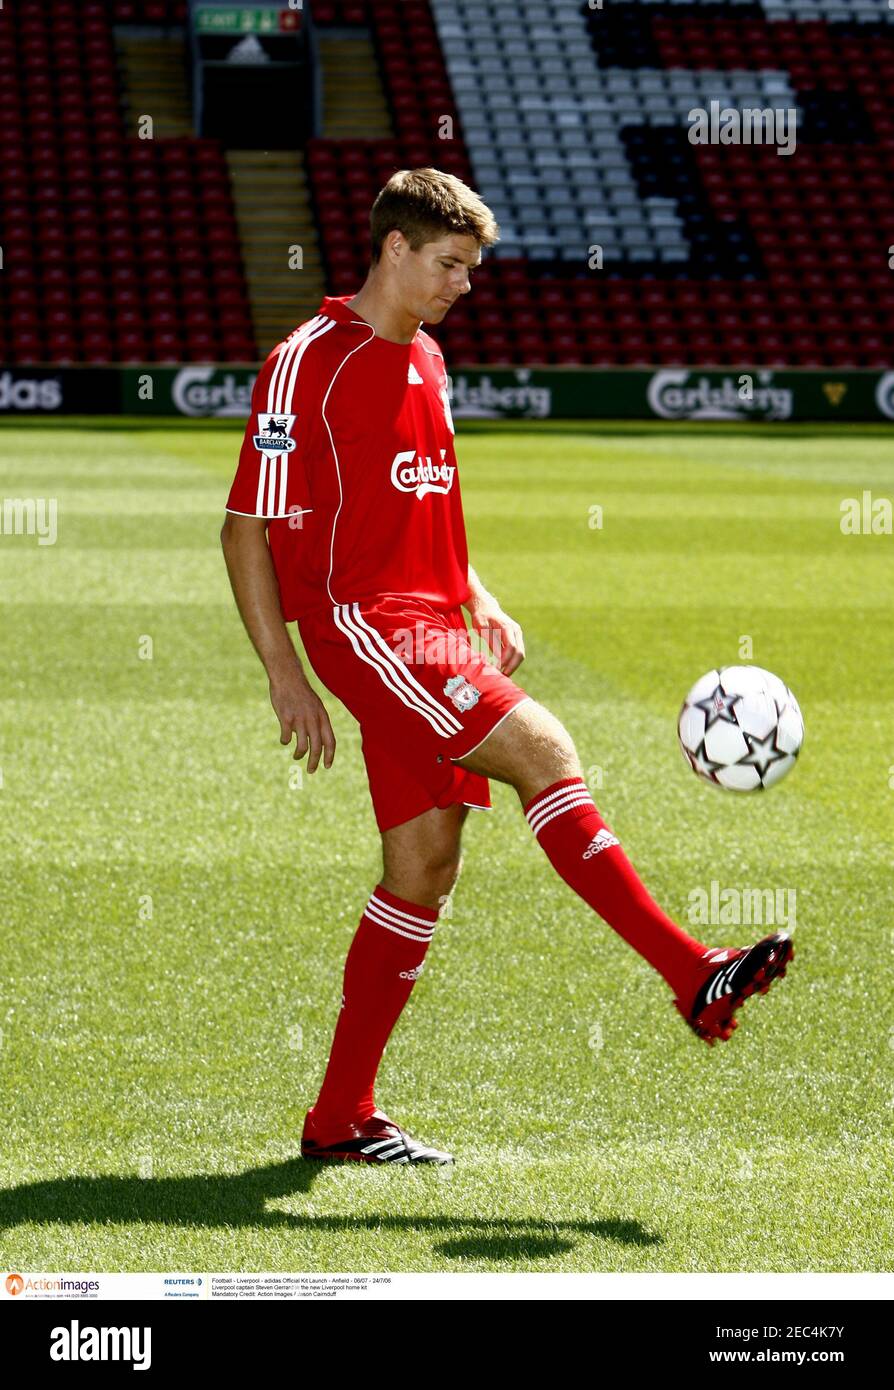 Football - Liverpool - adidas Official Kit Launch - Anfield - 06/07 -  24/7/06 Liverpool captain Steven Gerrard in the new Liverpool home kit  Mandatory Credit: Action Images / Jason Cairnduff Stock Photo - Alamy